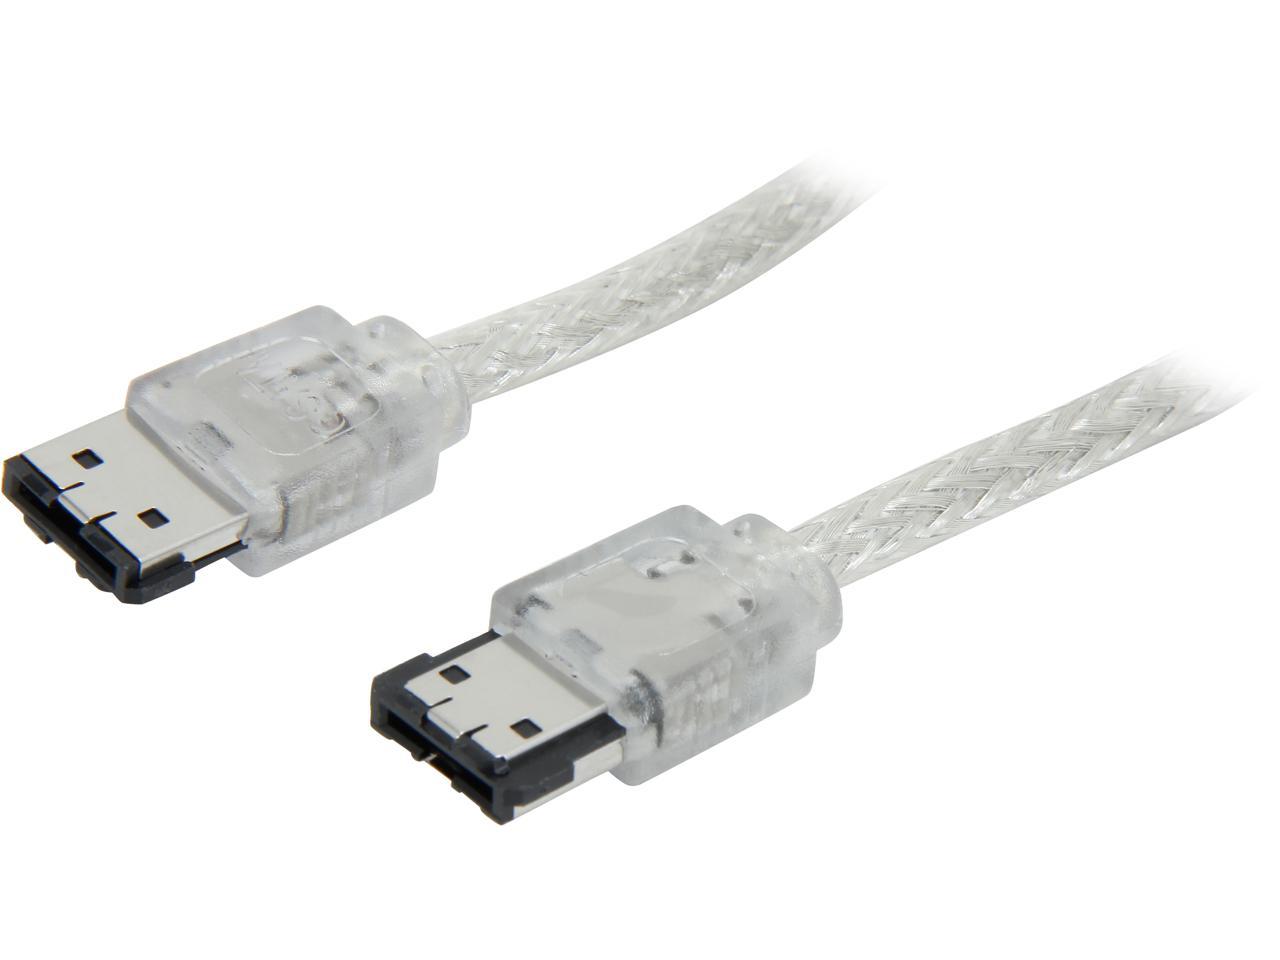 Nippon Labs ESATA3-EXS-3-llSL 3 ft. eSATA III(Type I) Male to Male Cable, Silver - image 1 of 3